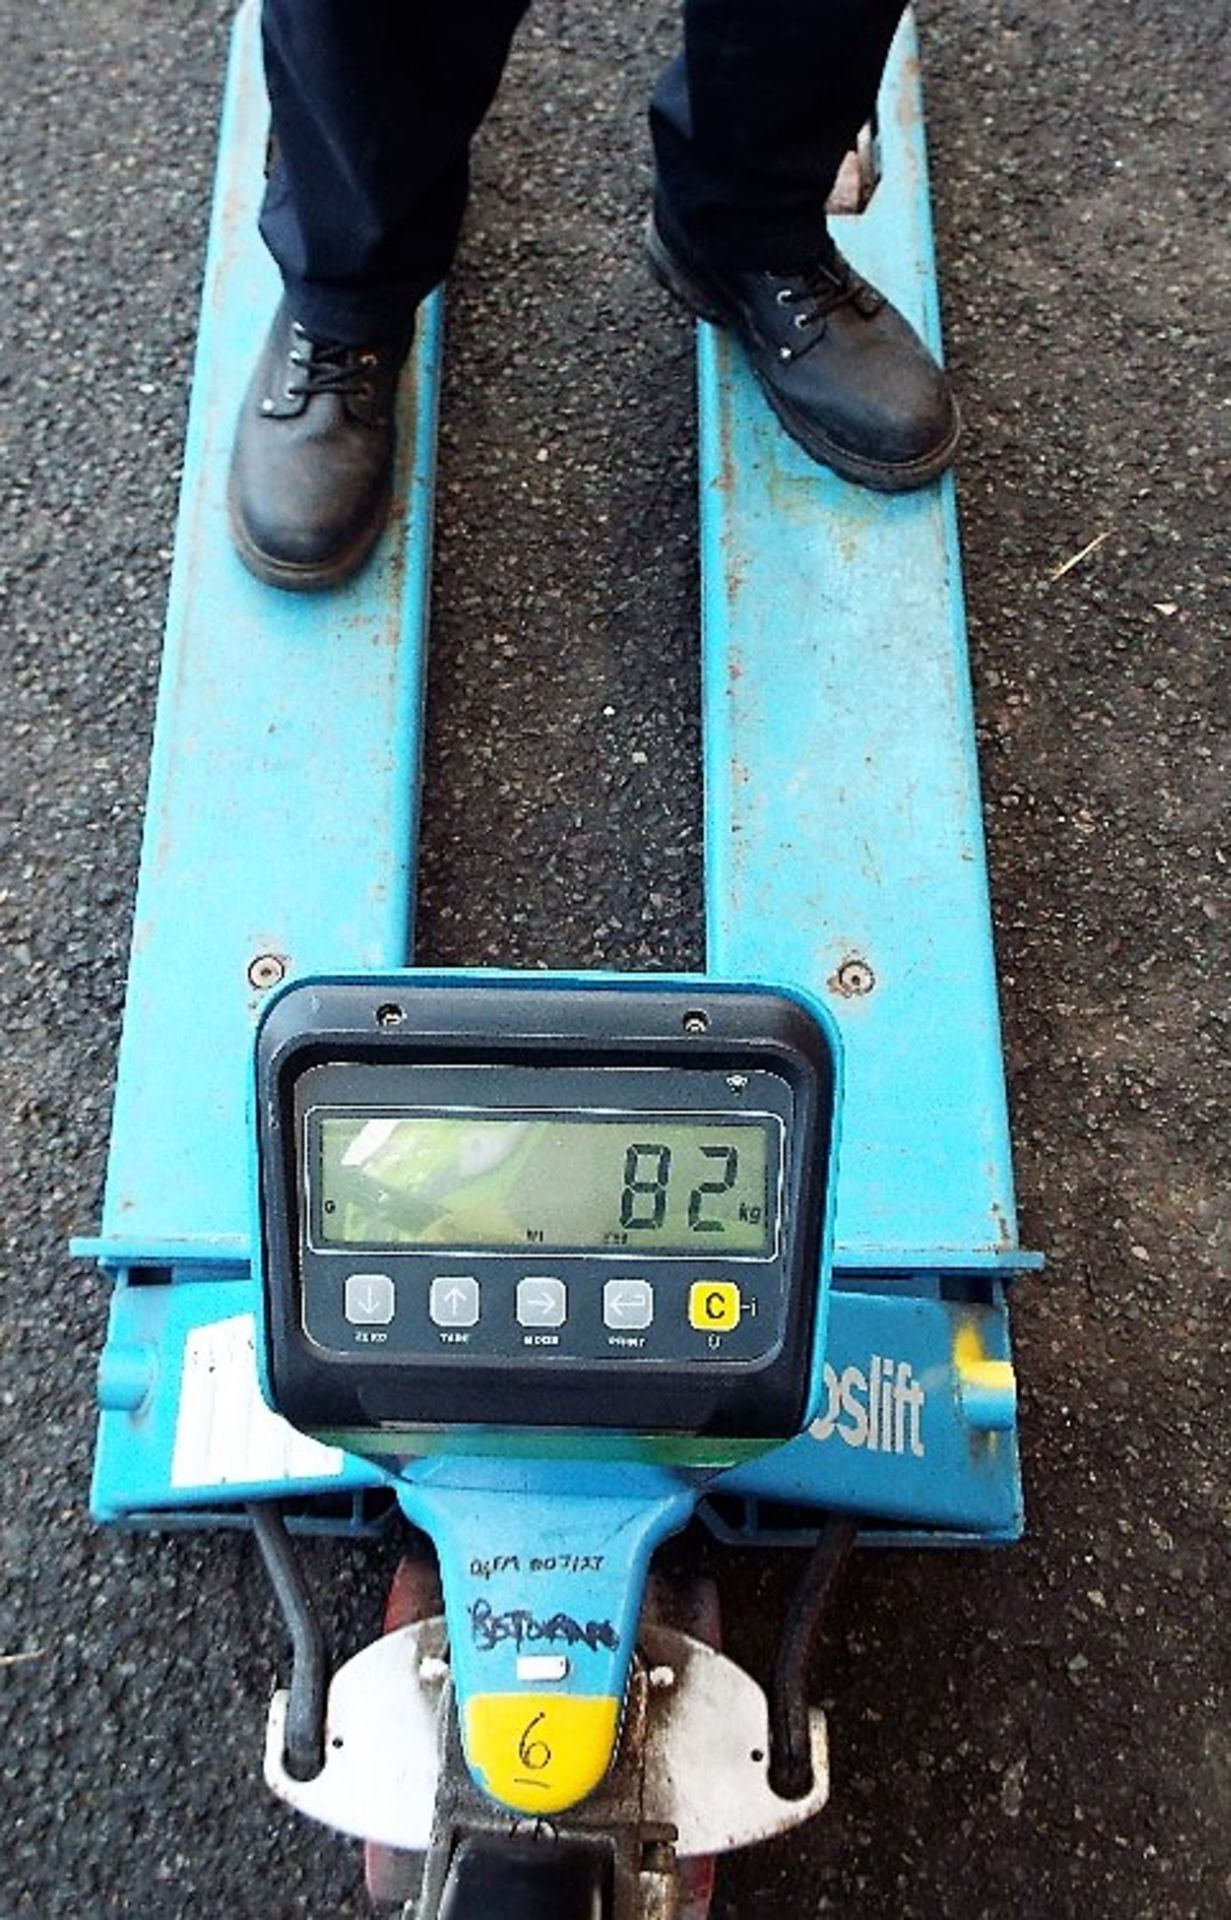 Pallet Truck With Integrated Weighing Scales. - Image 4 of 4